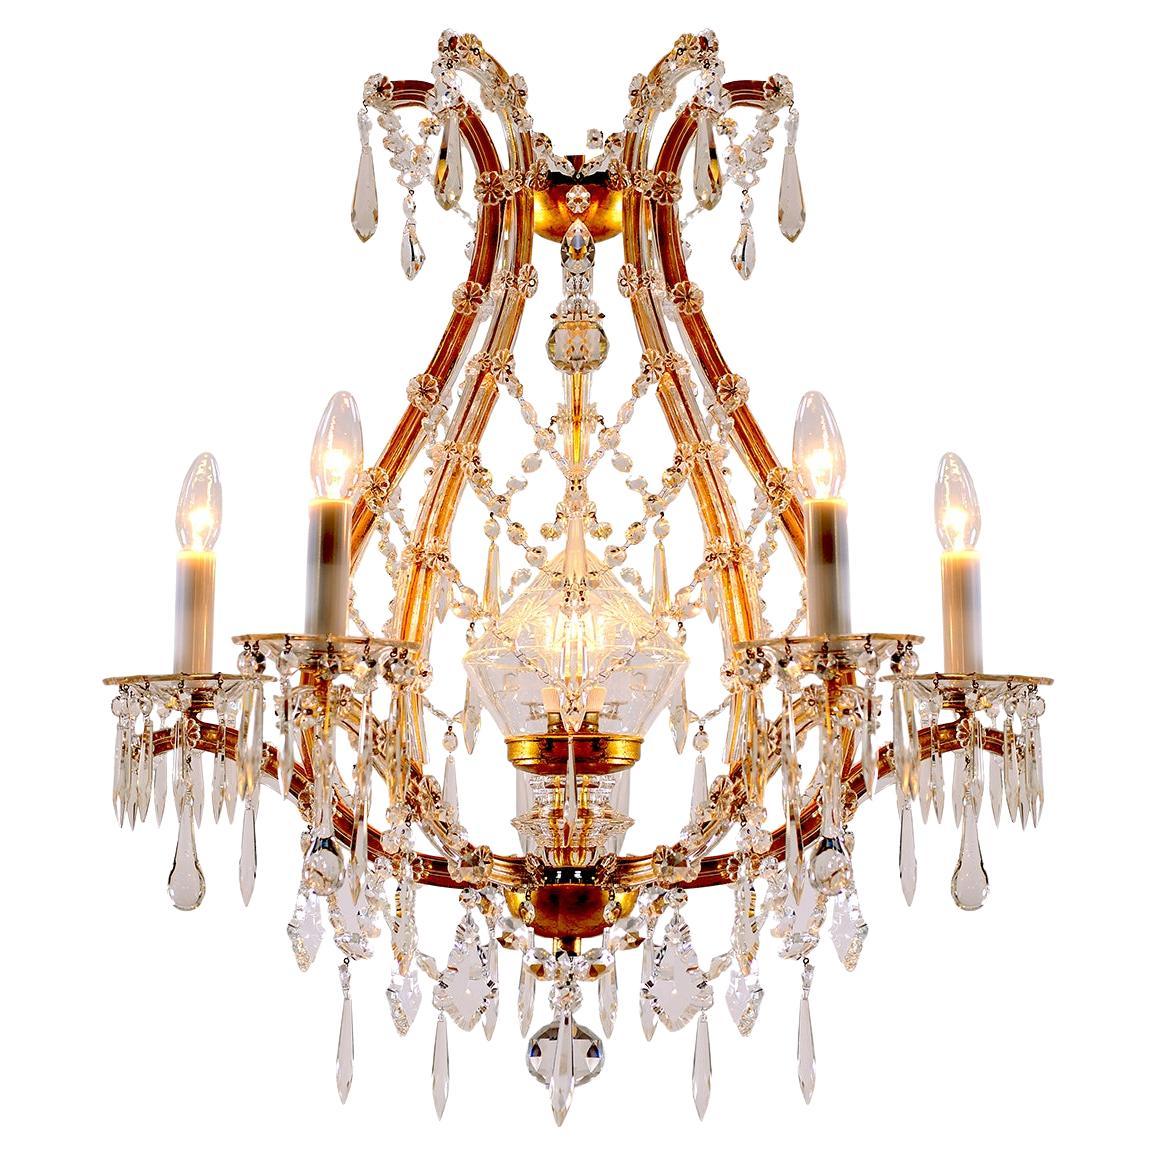 Original Maria Theresien Style Crystal Glass and Brass Chandelier, 1920s